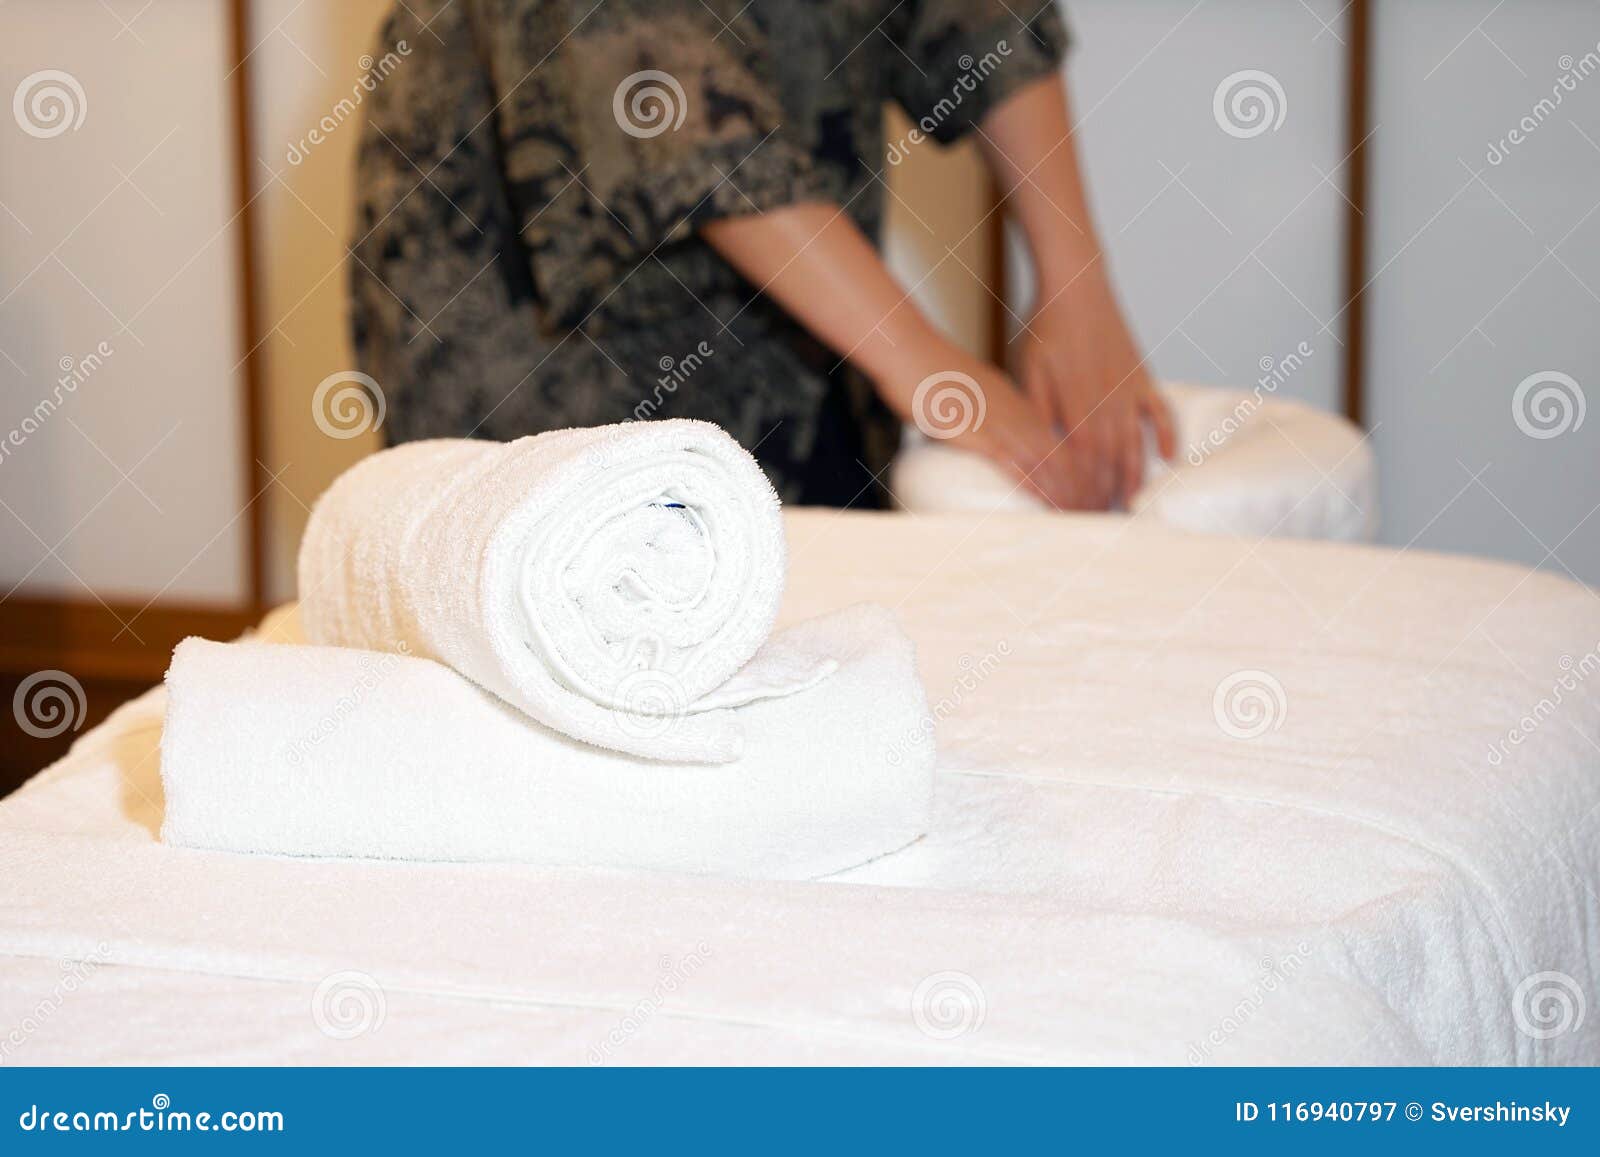 Maid cleaning at the spa stock image pic